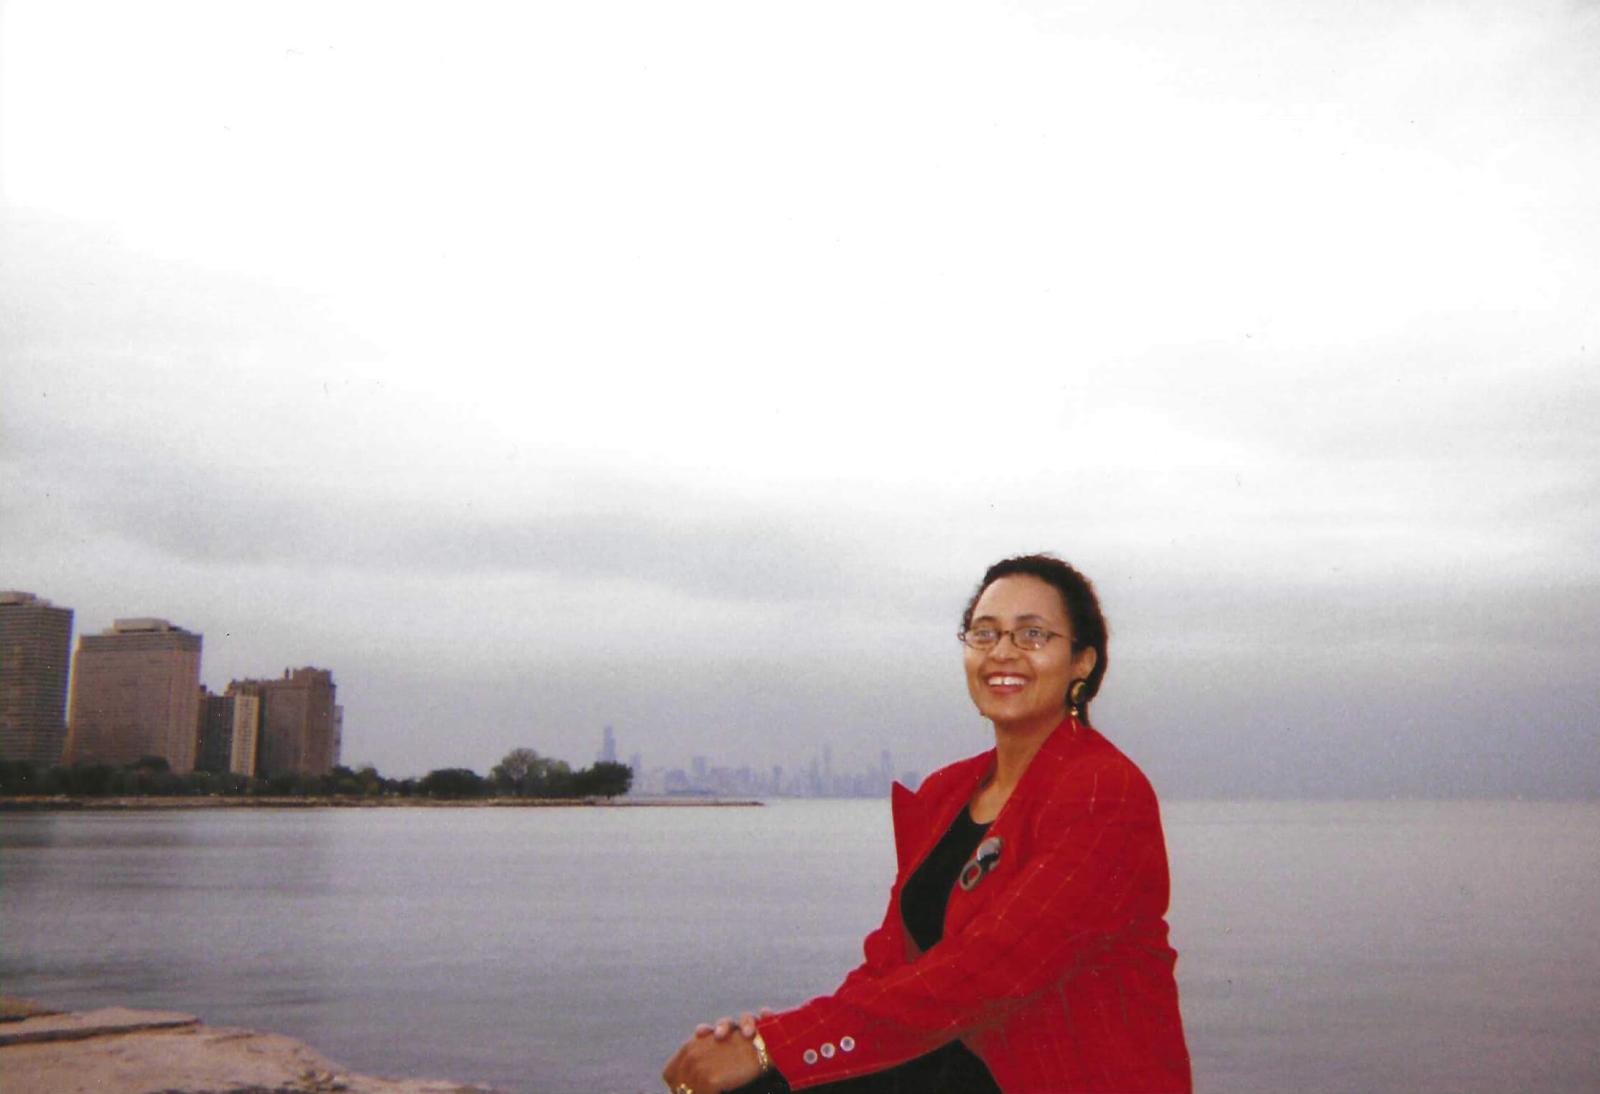 Christa Beverly in front of a lake with a city in the background